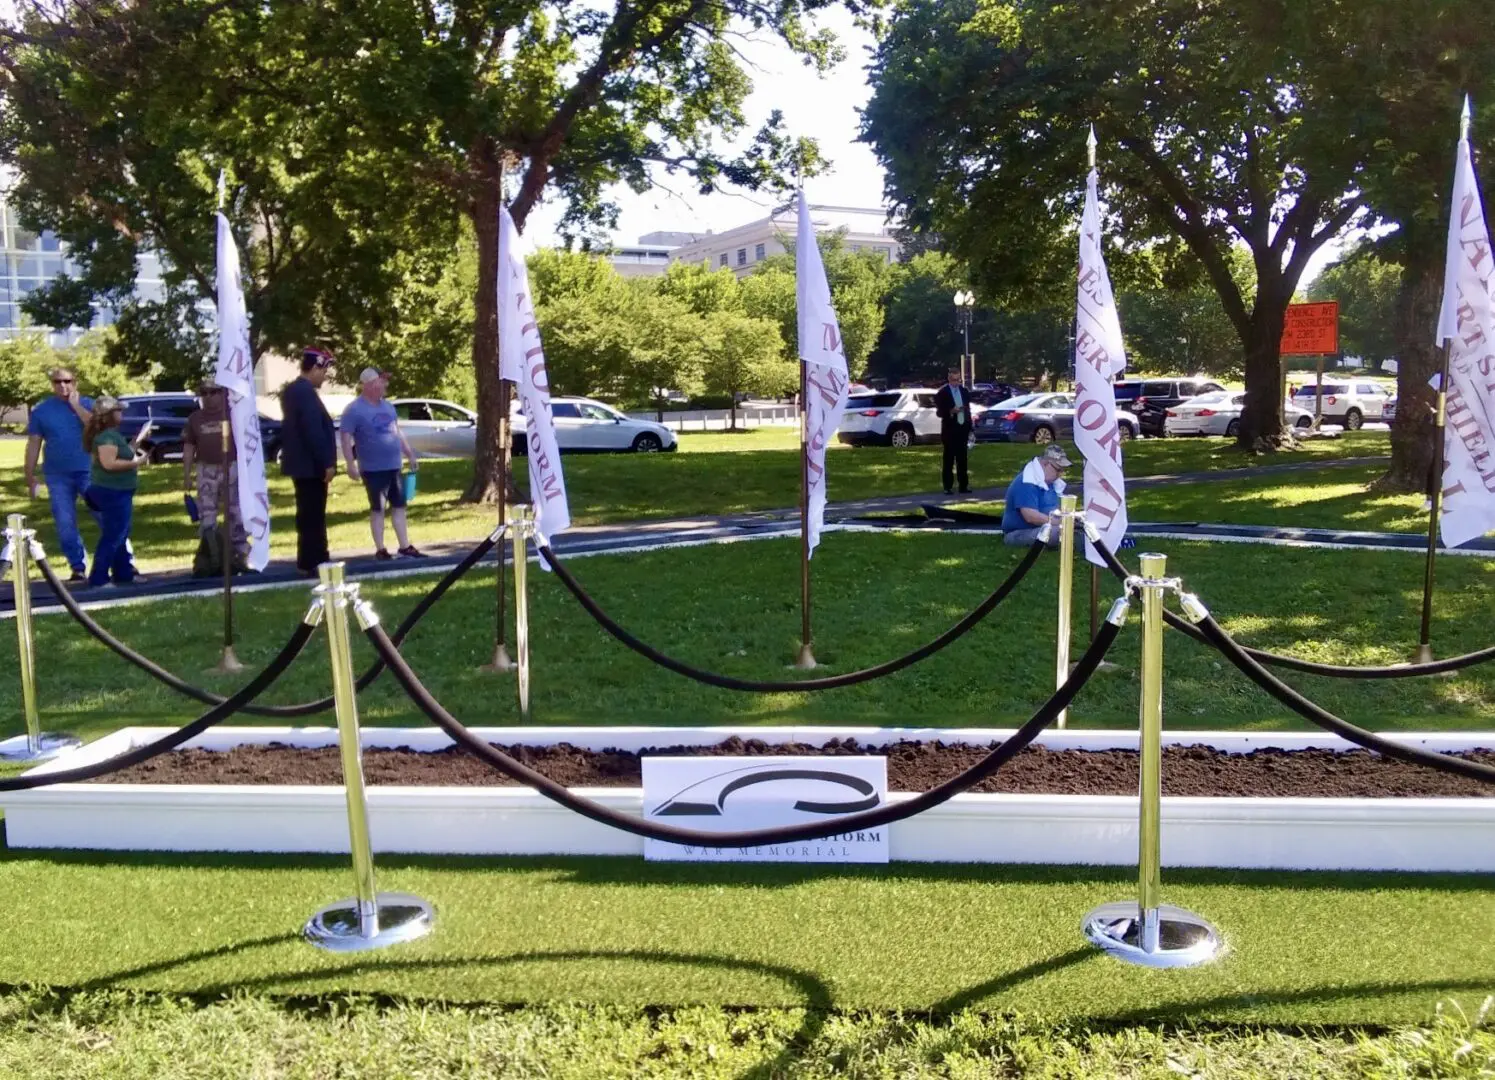 A grassy area with flags and flag poles.